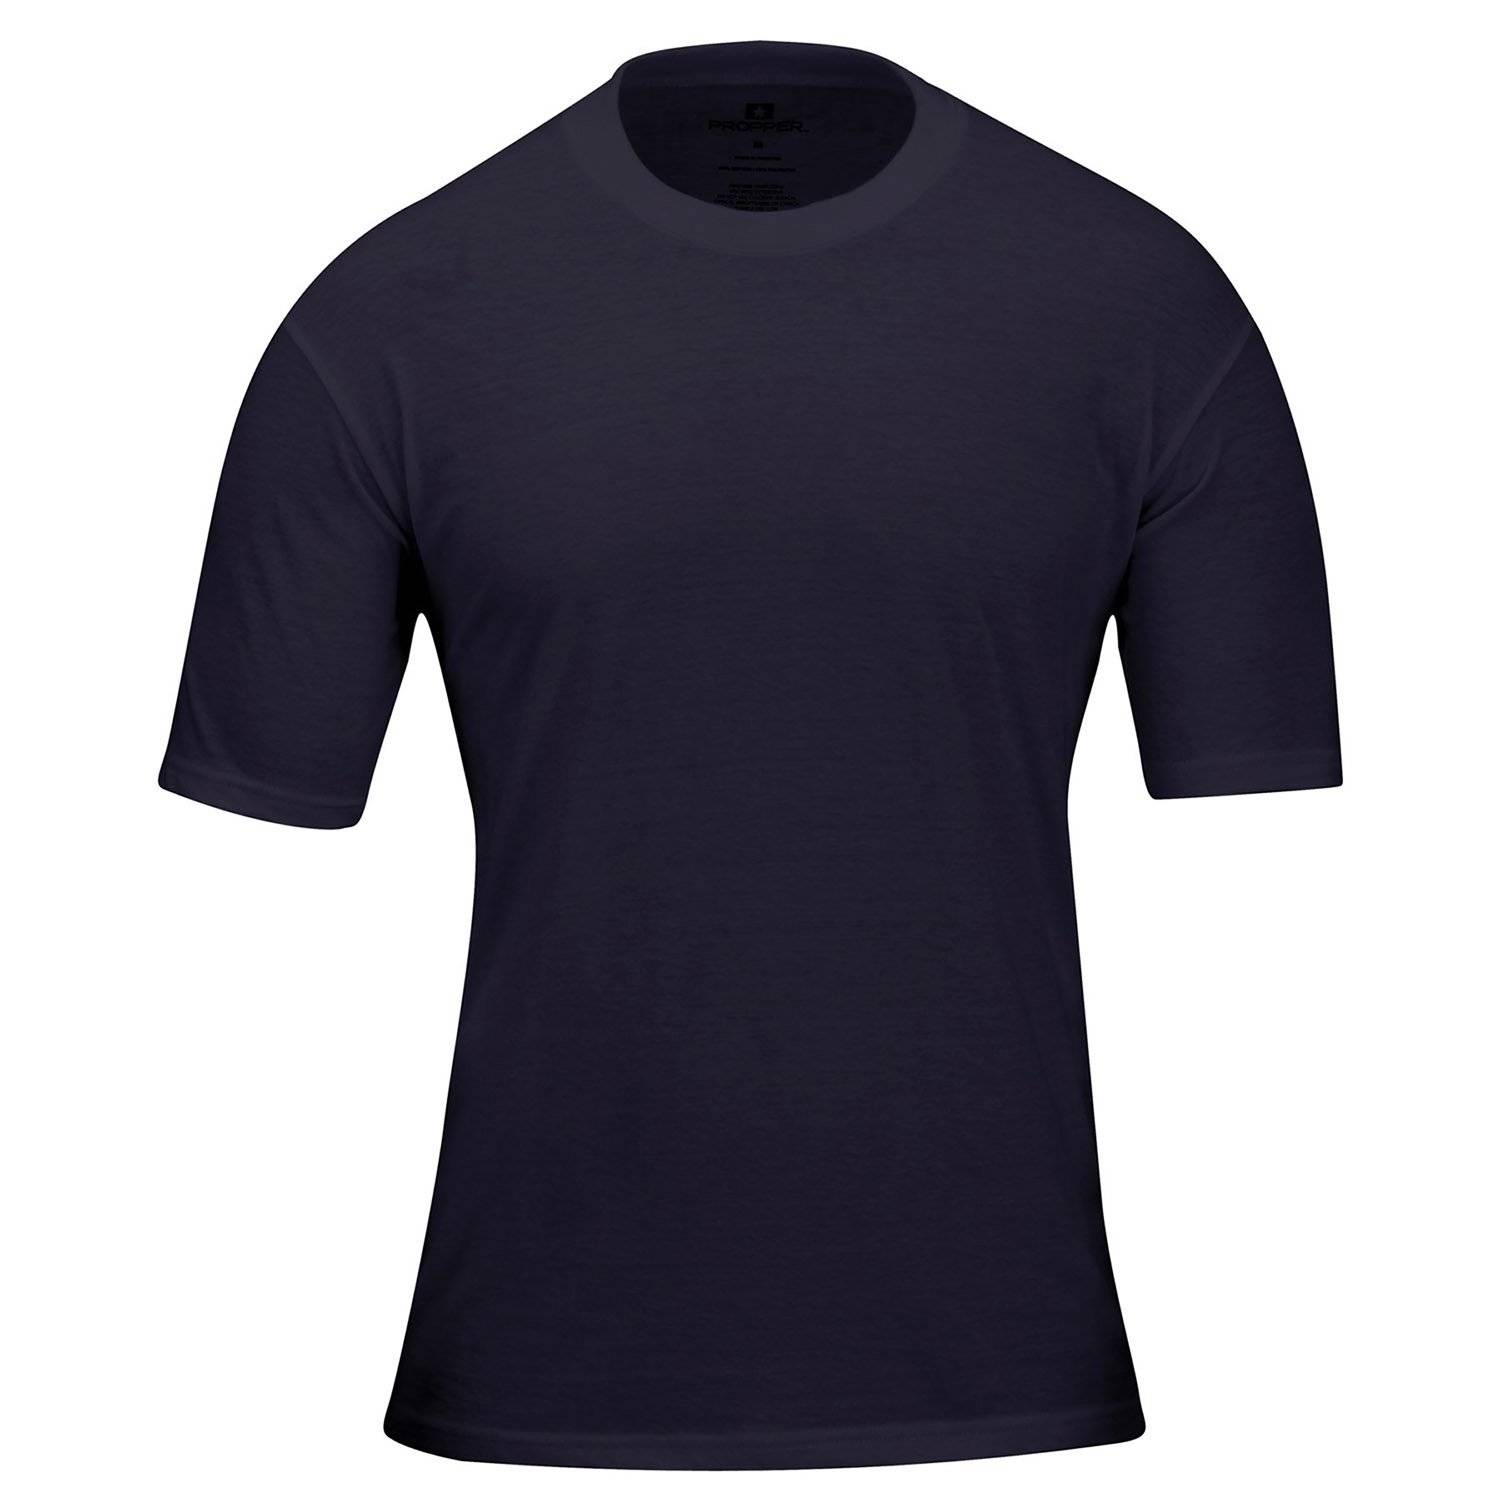 PROPPER T SHIRTS (3 PACK)